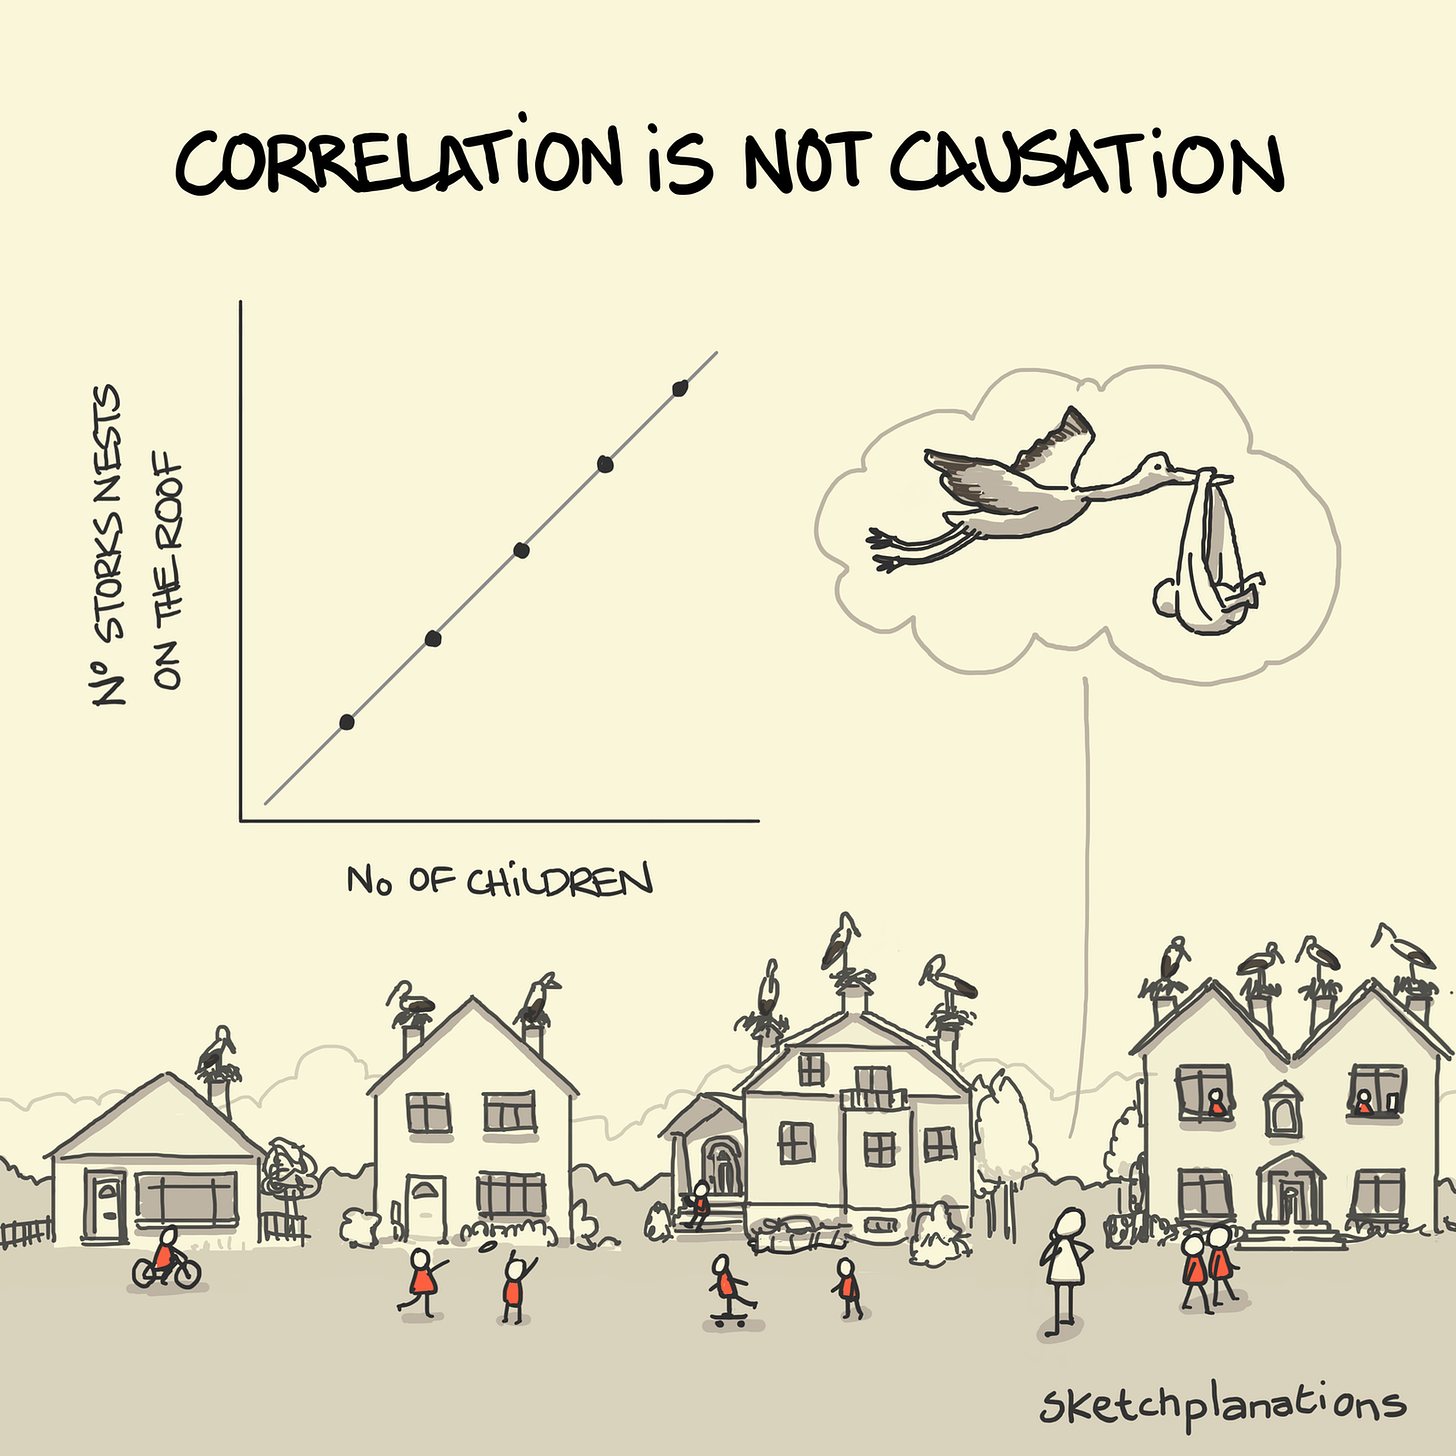 Correlation is not causation - Sketchplanations